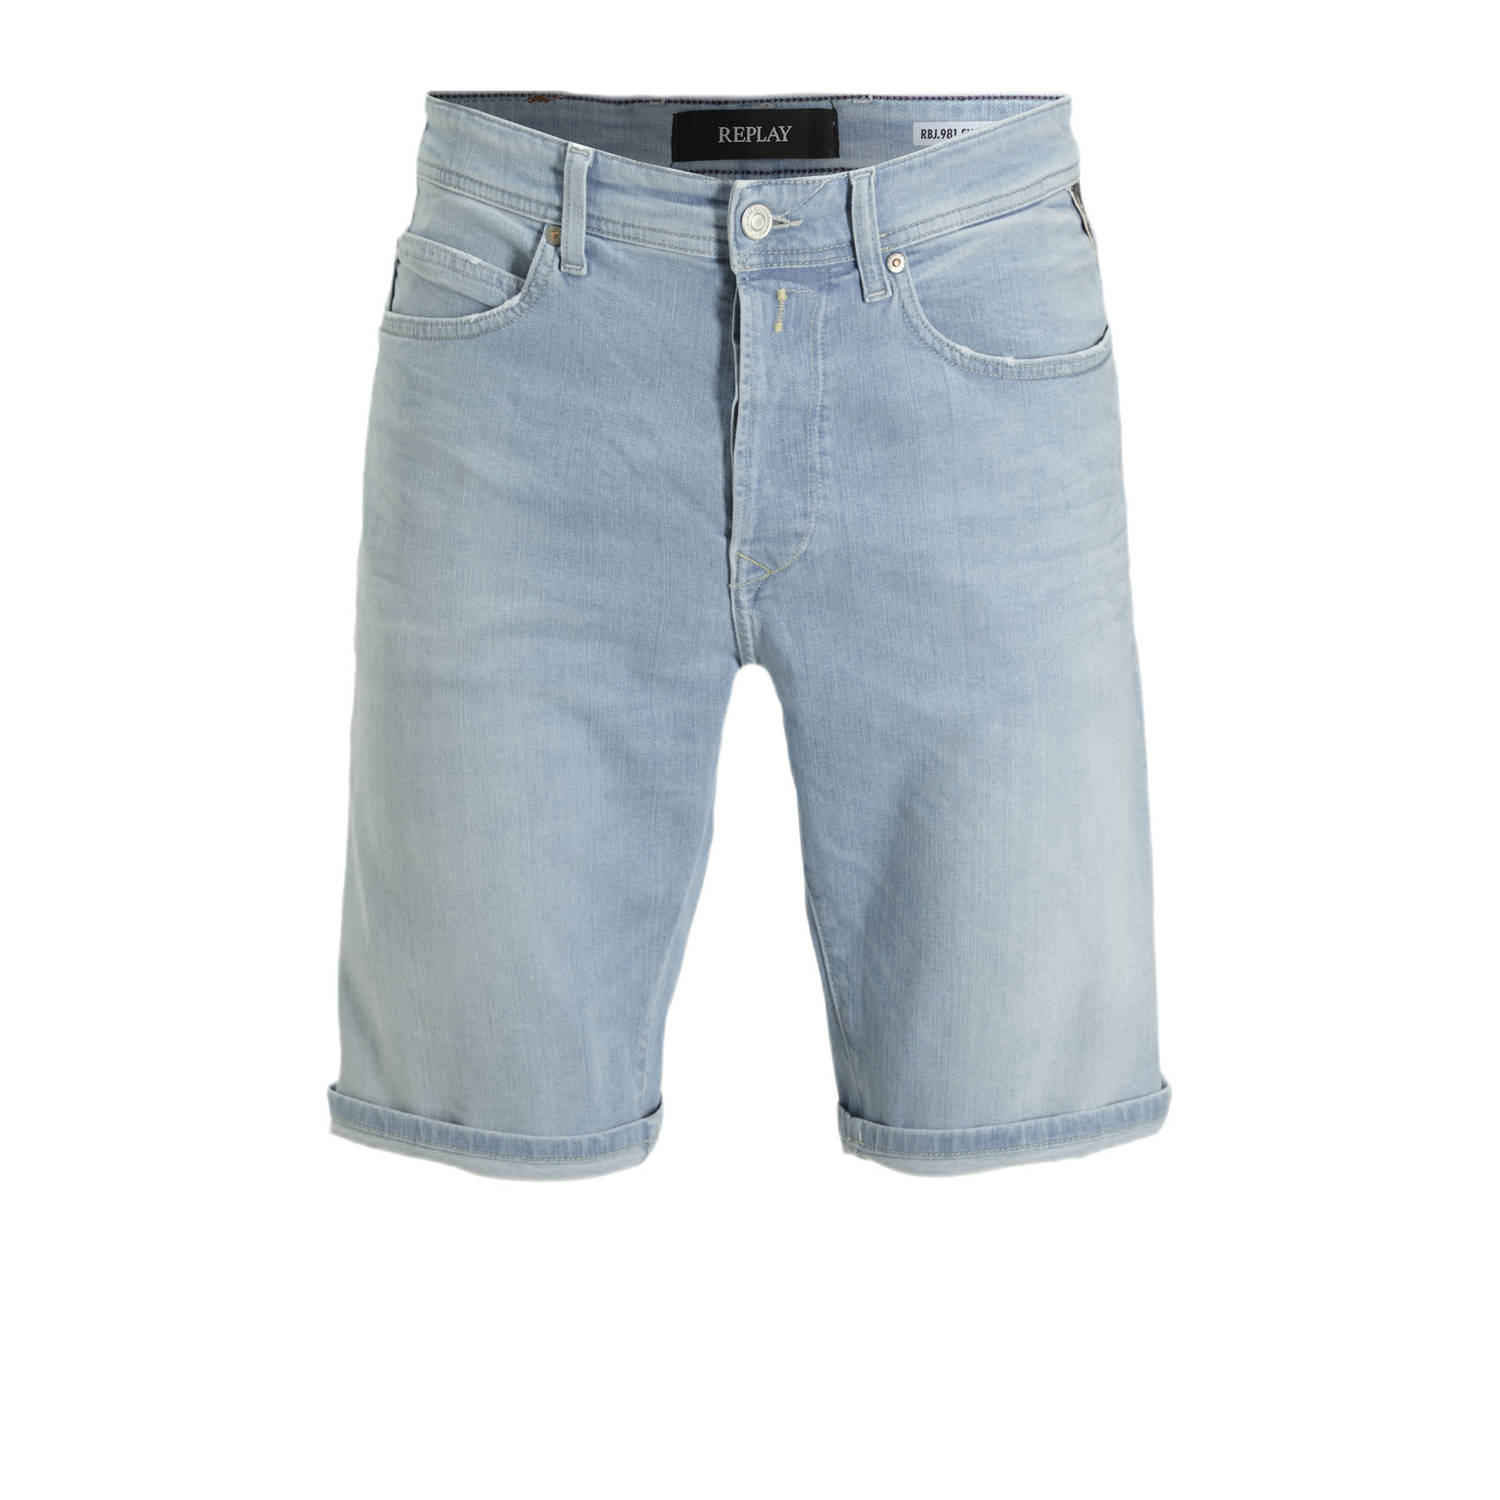 REPLAY tapered fit short RBJ.981 light blue